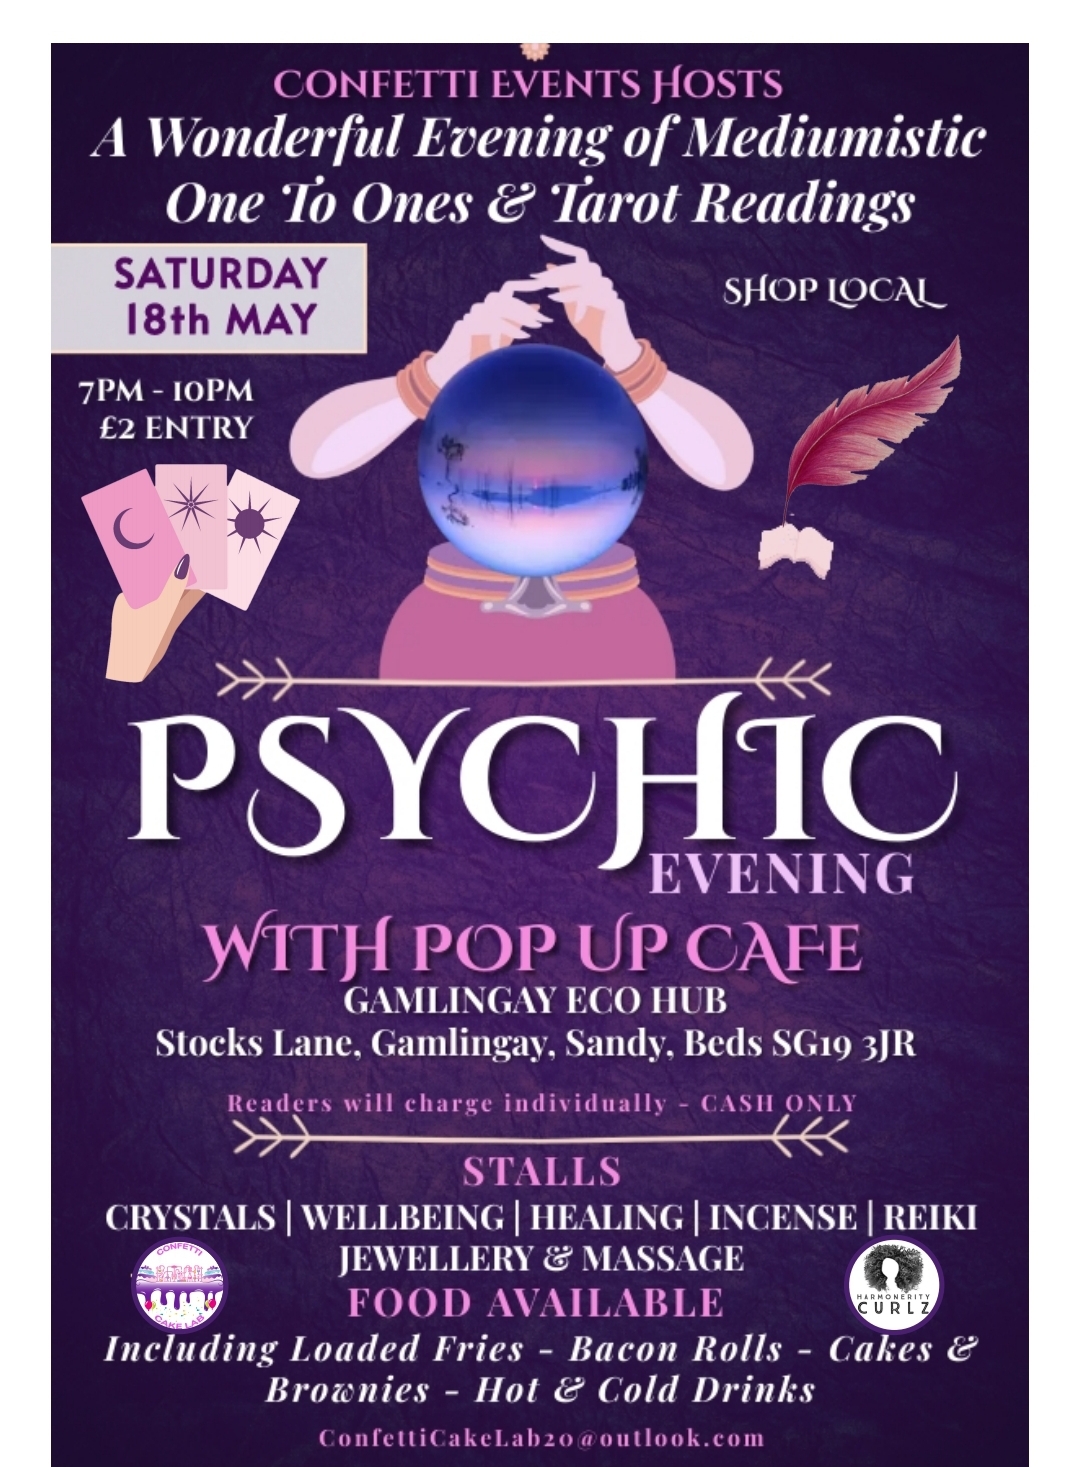 Psychic evening, Saturday may 18th 5 30 to 10 30. A Wonderful Evening of Mediumistic One to One and Tarot Readings